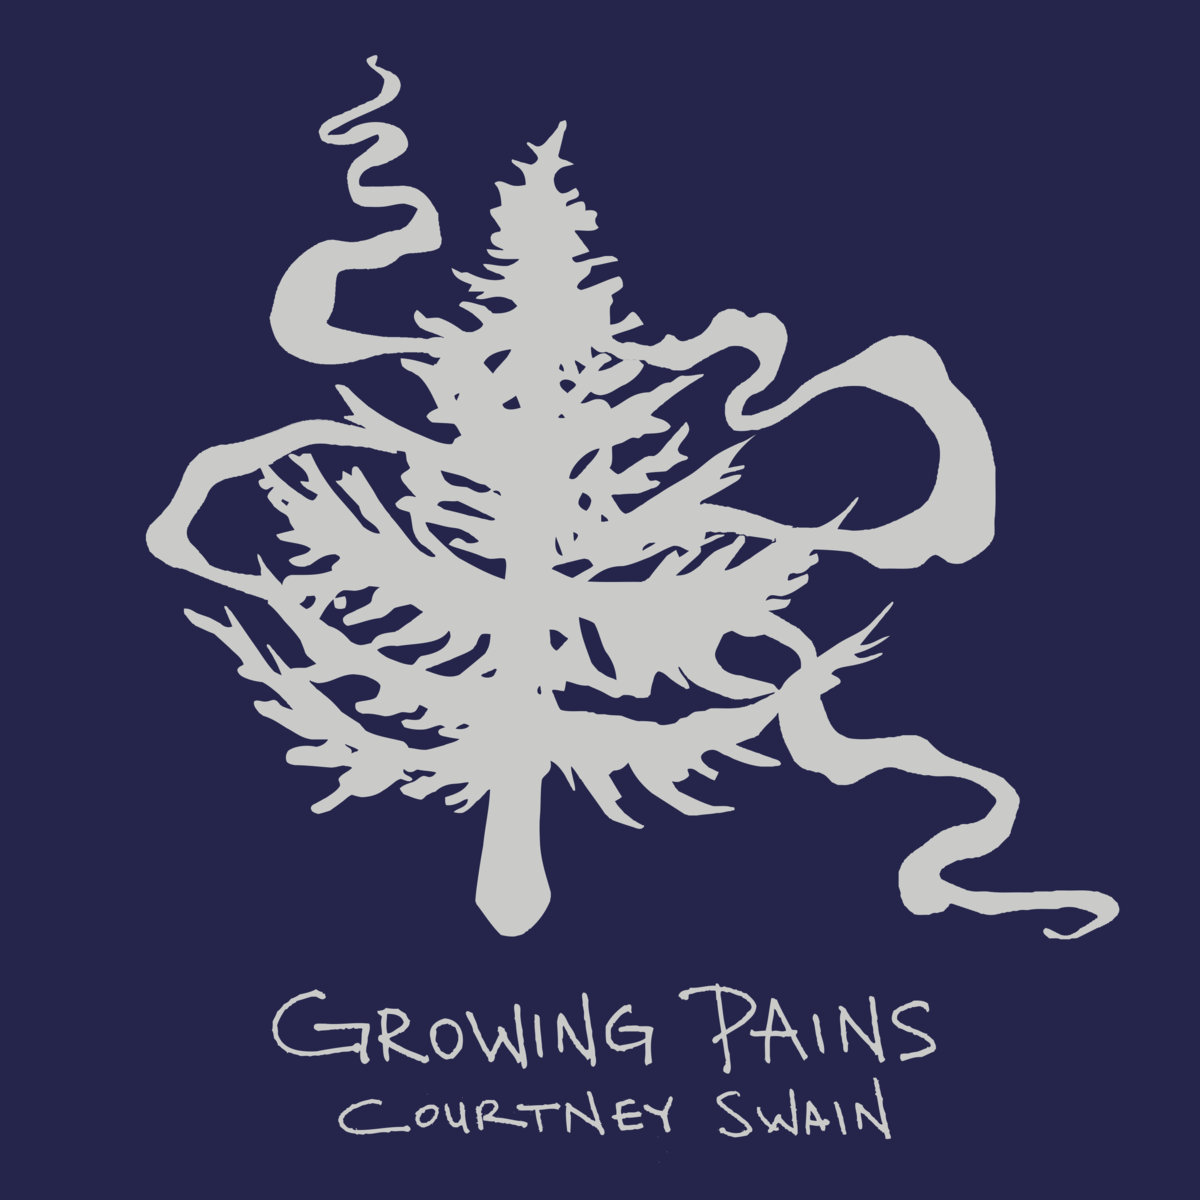 Growing Pains by Courtney Swain